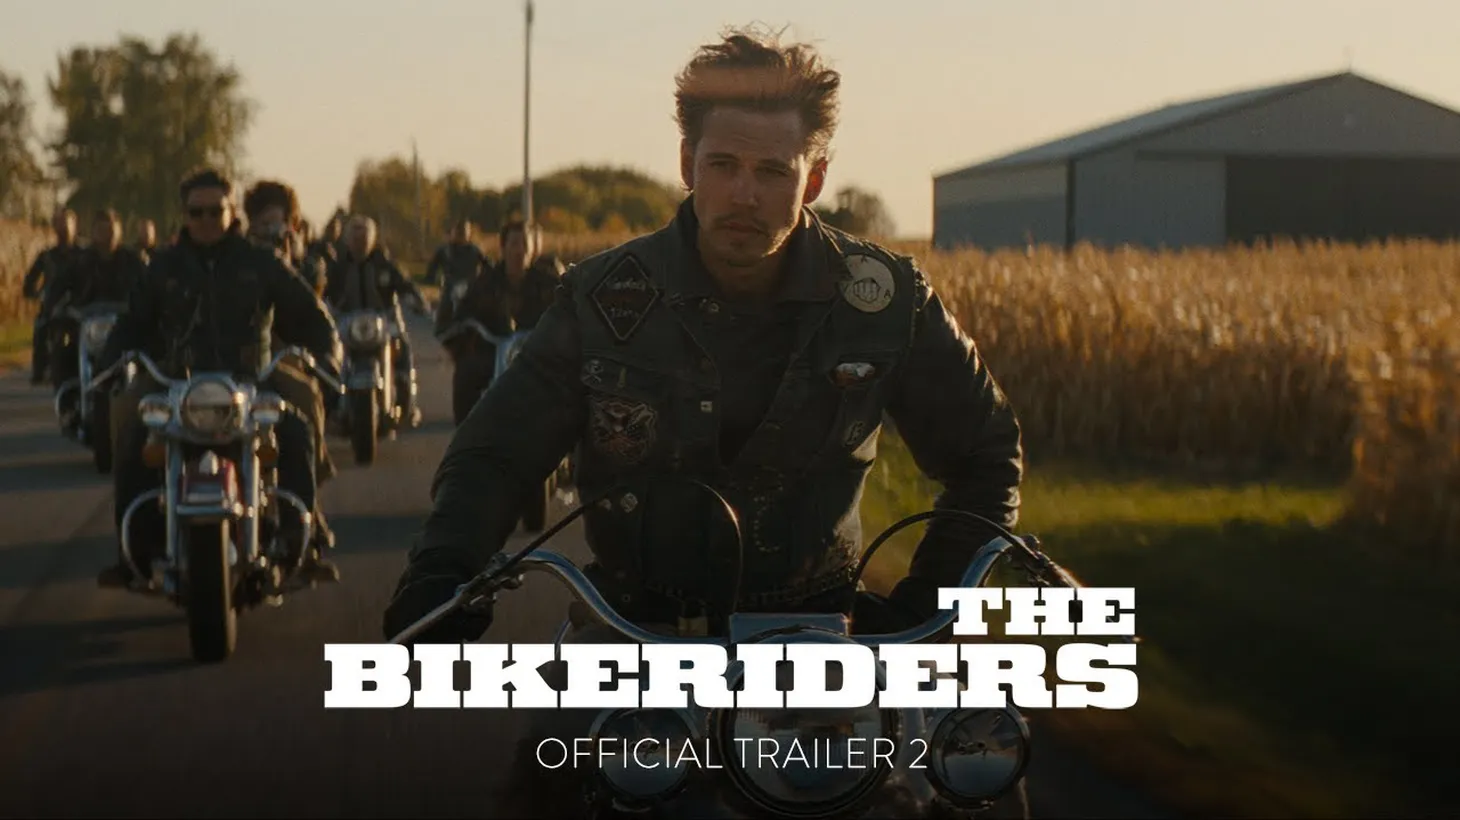 “The Bikeriders” stars Jodie Comer, Austin Butler, and Tom Hardy as members of a motorcycle club called The Vandals.